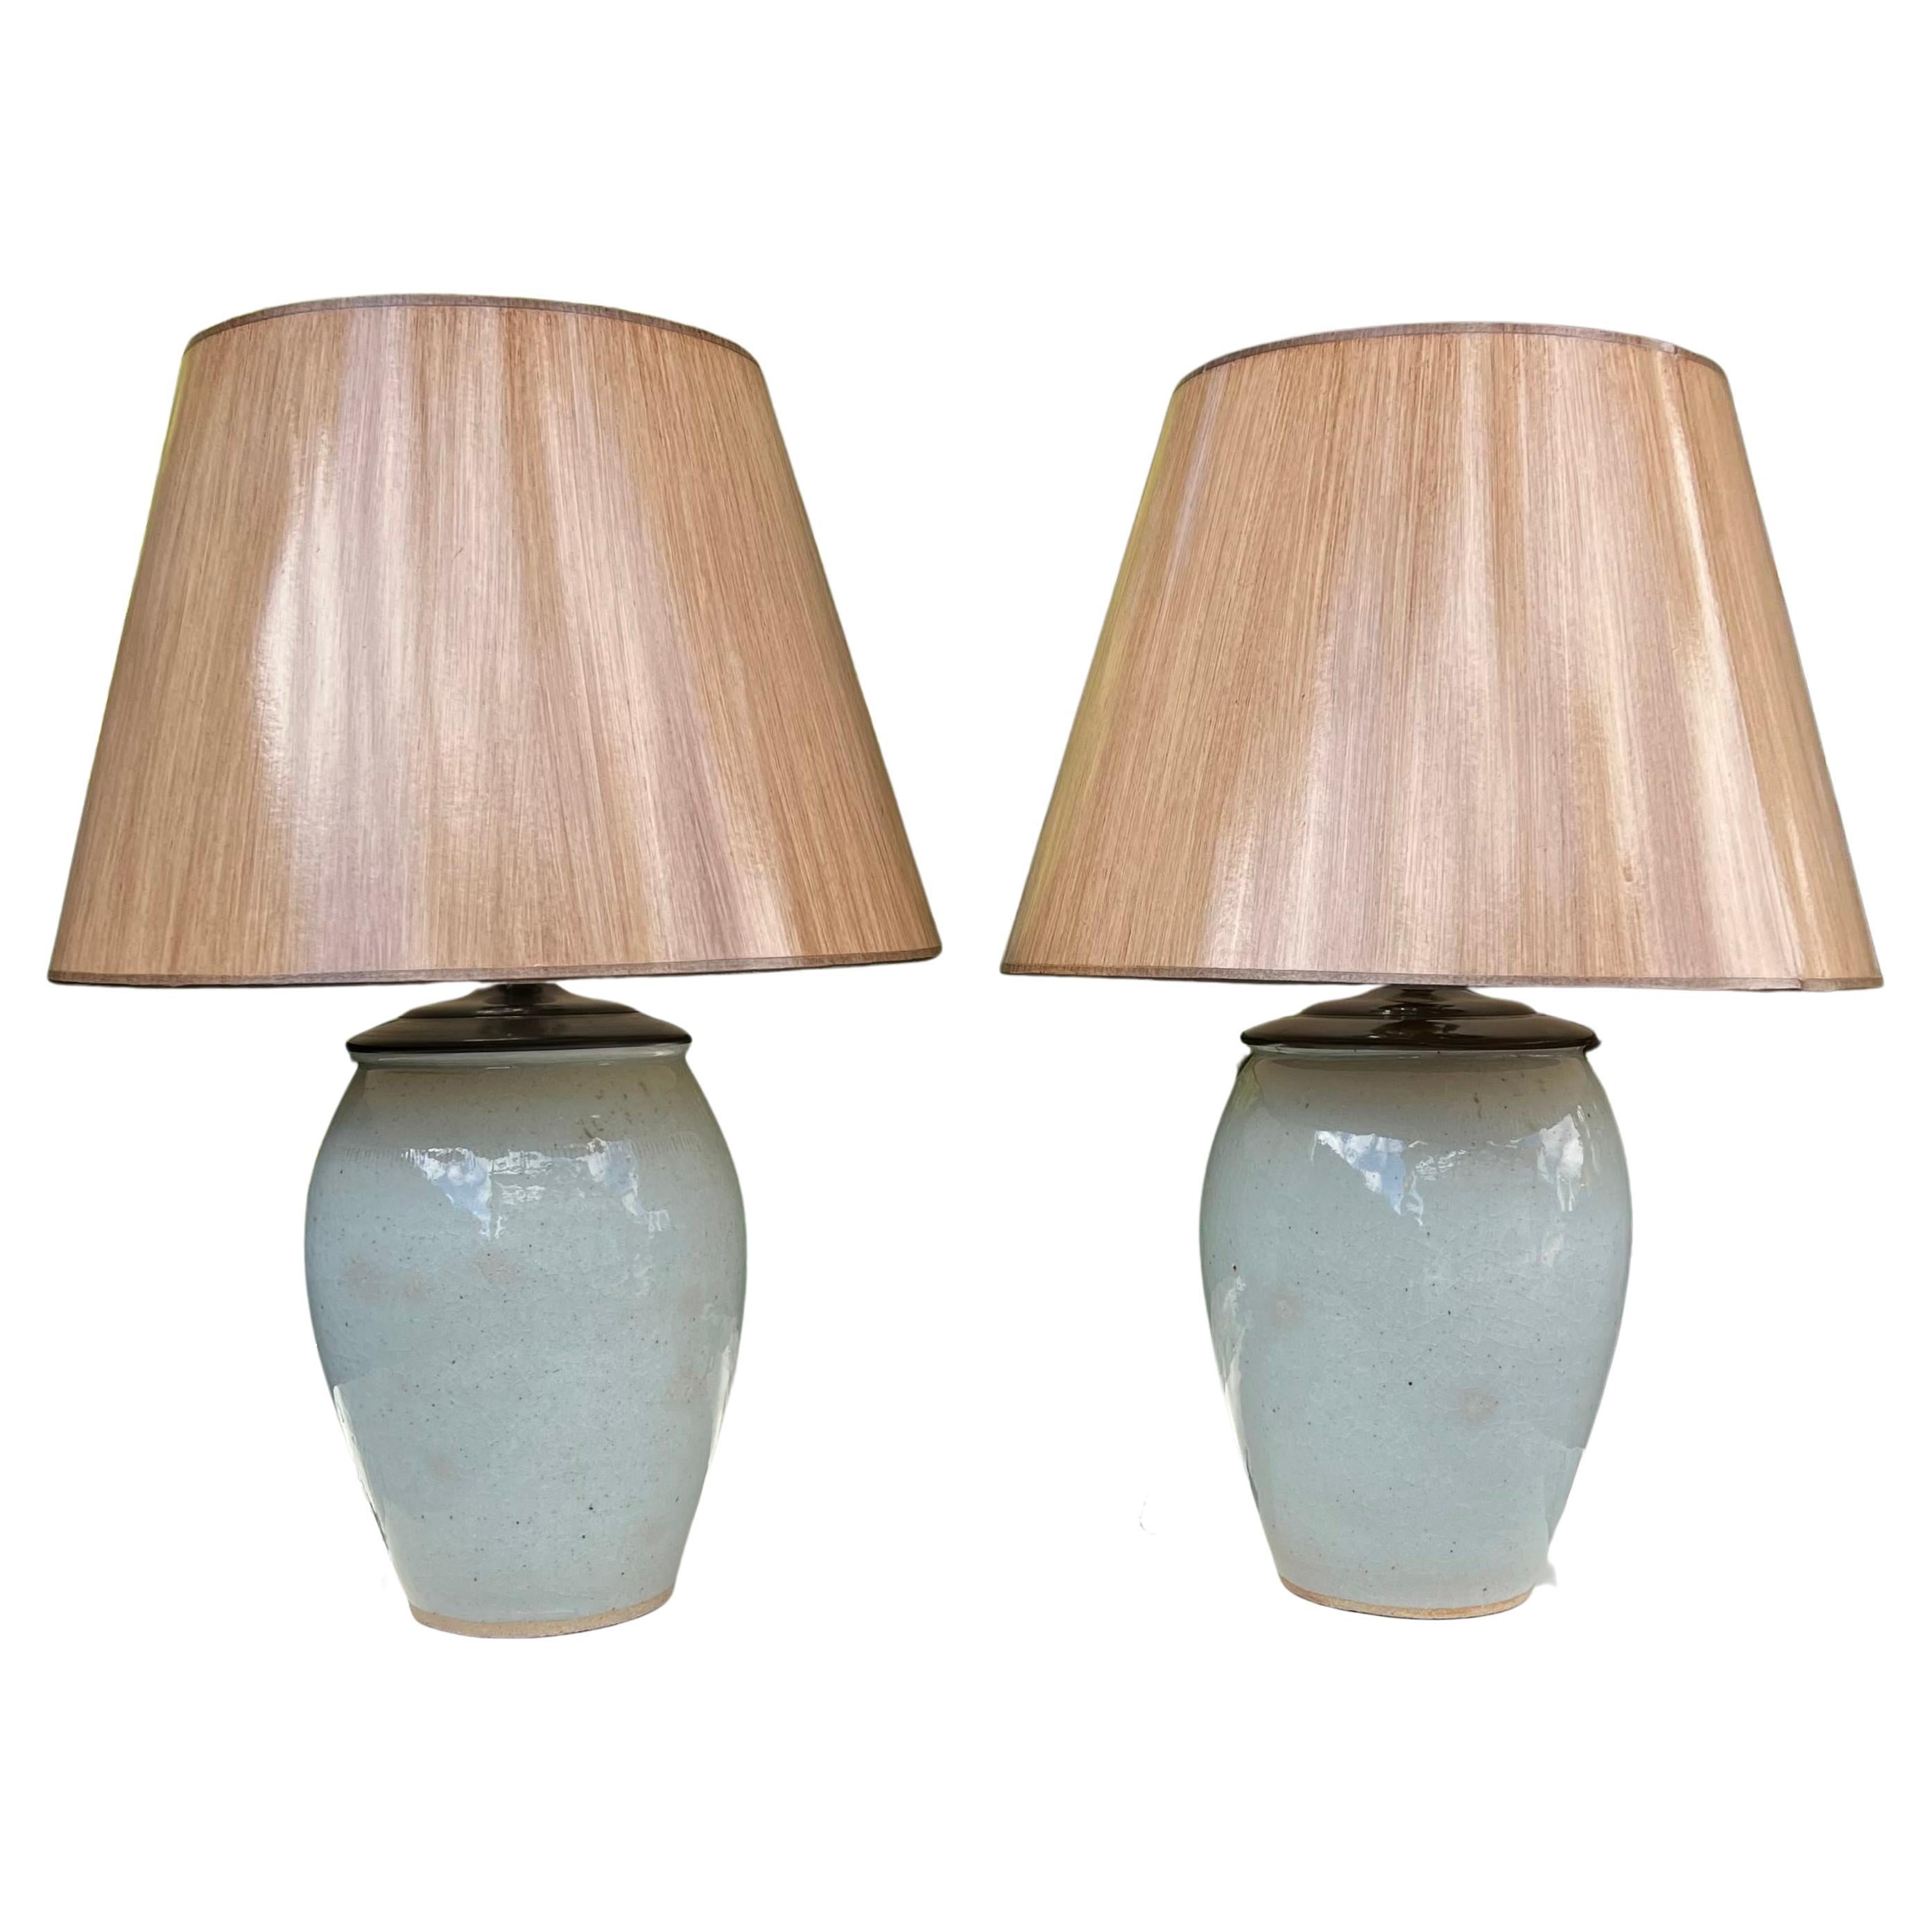 Pair of Gray Glazed Ceramic Lamps with Shades